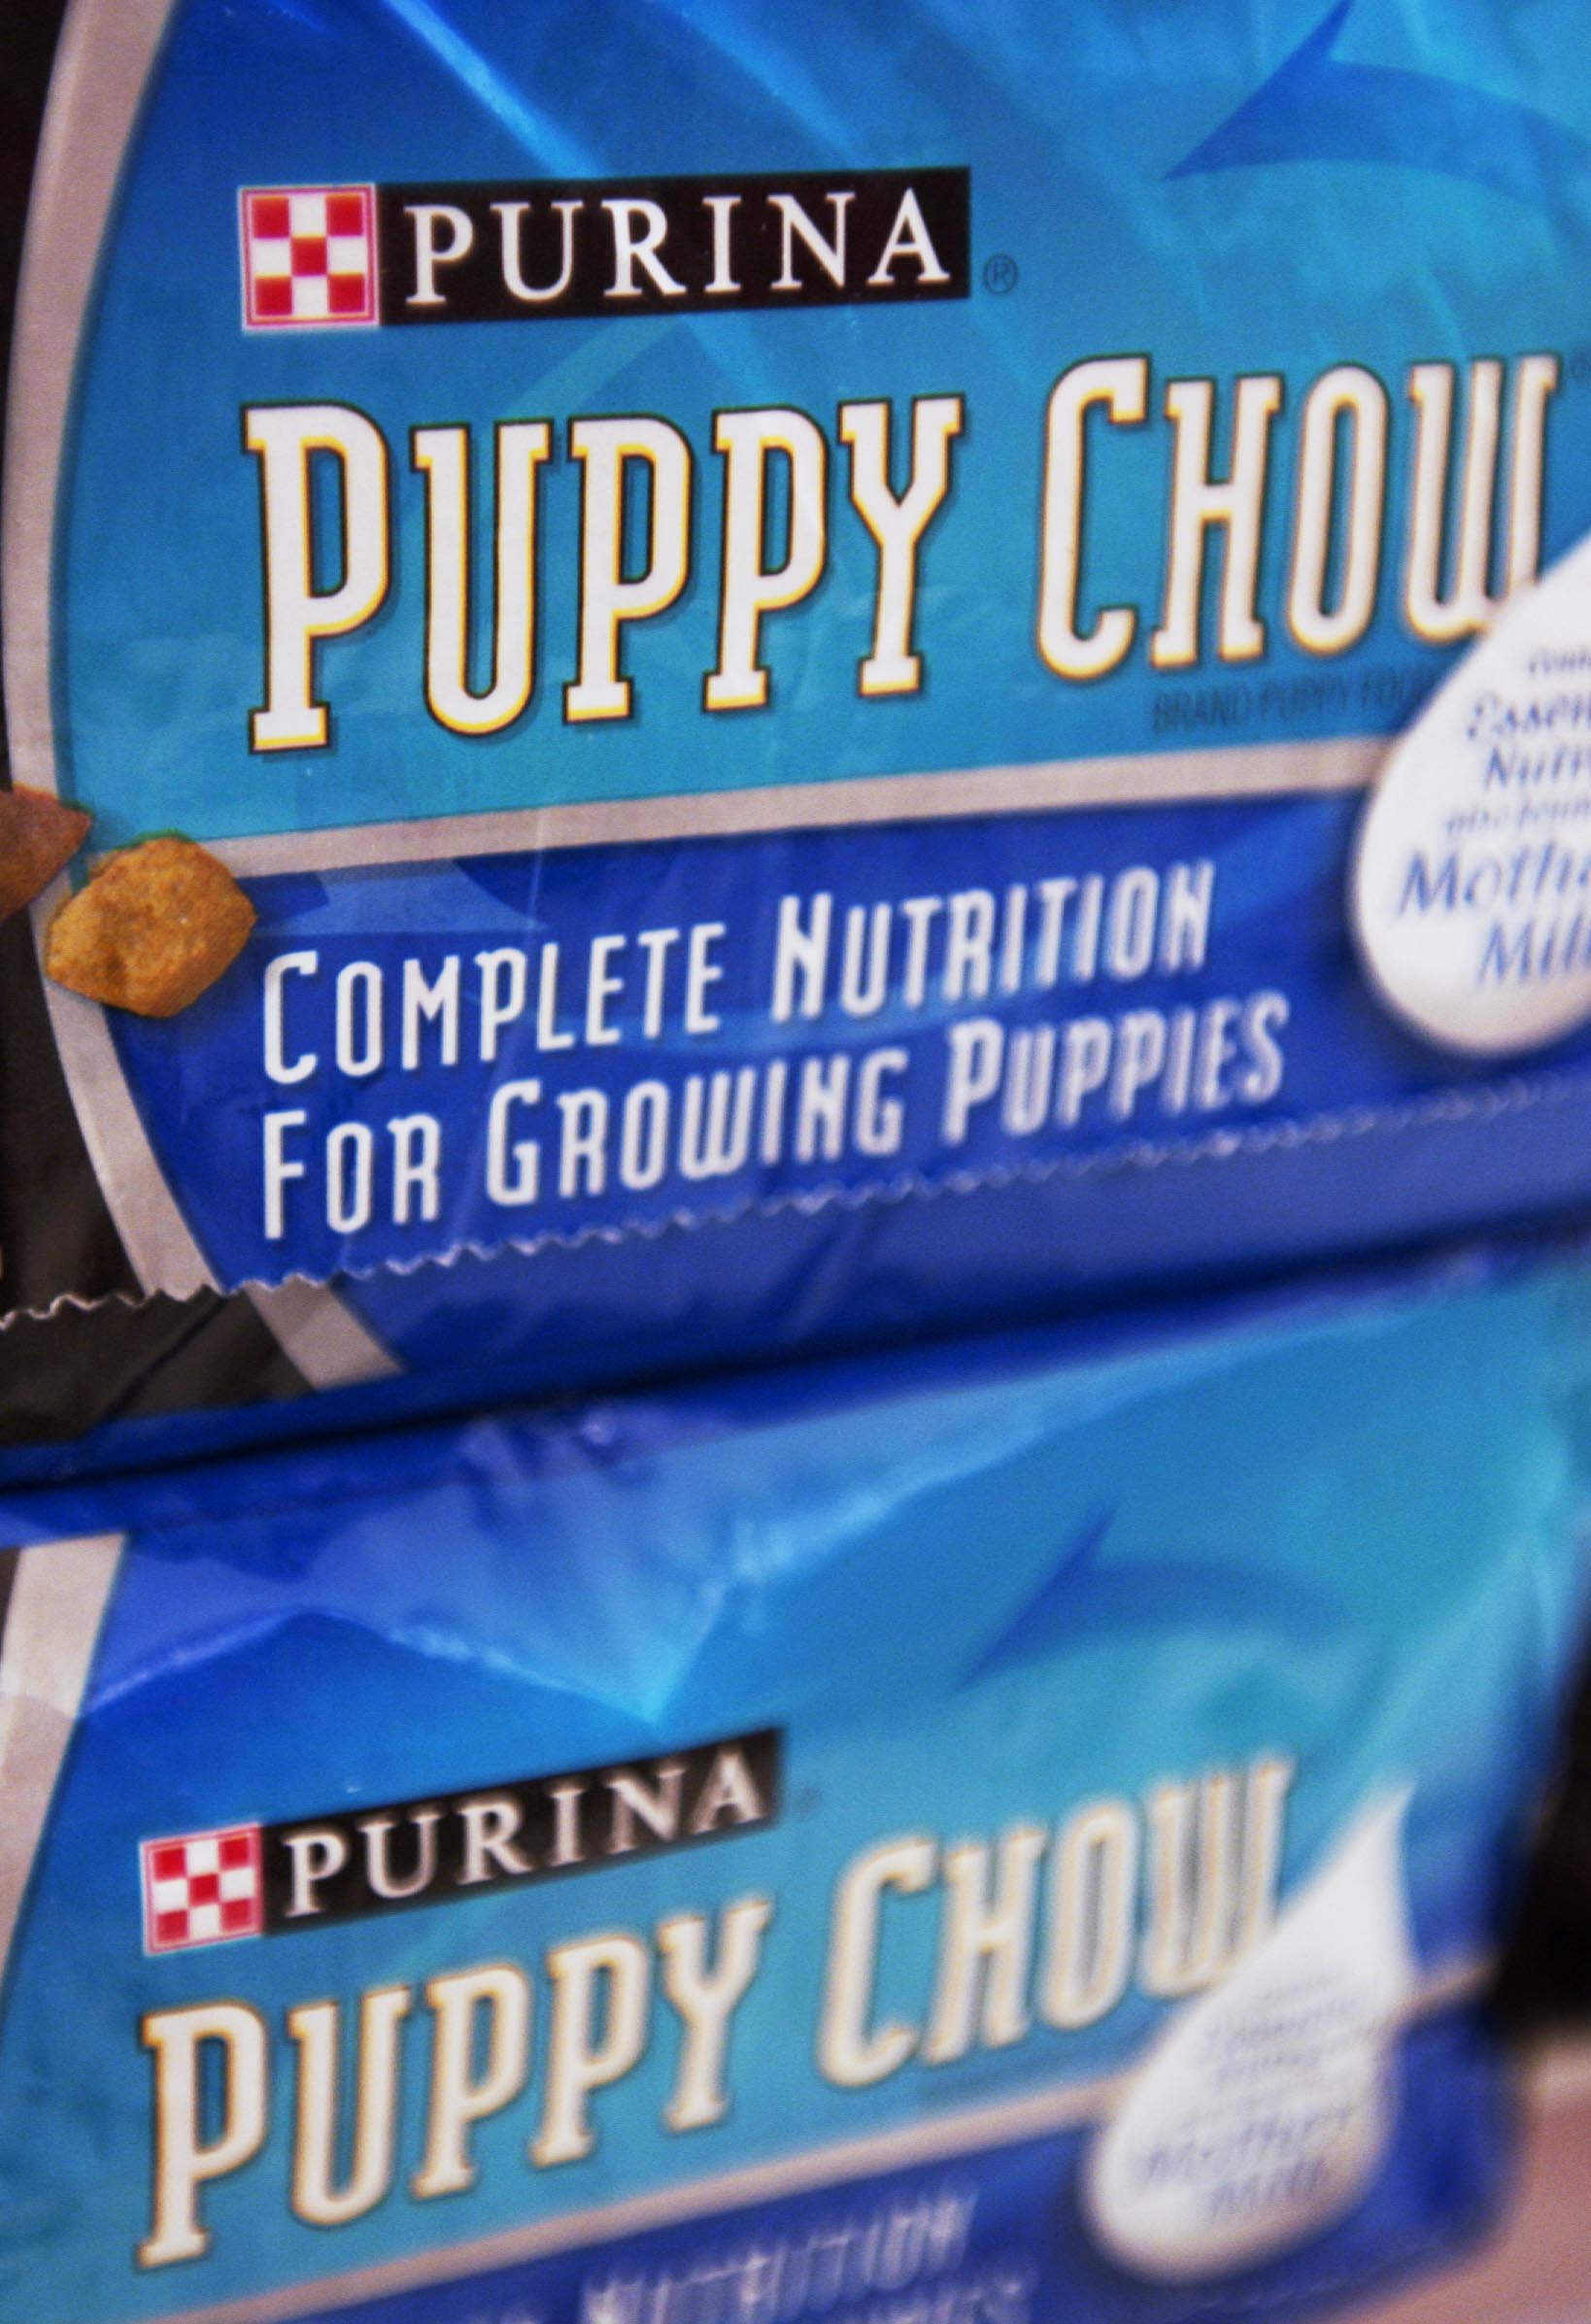 Purina dog food is on display at an Associated Supermarket in New York on Aug. 16, 2005 (Andrew Harrer—Bloomberg/Getty Images)